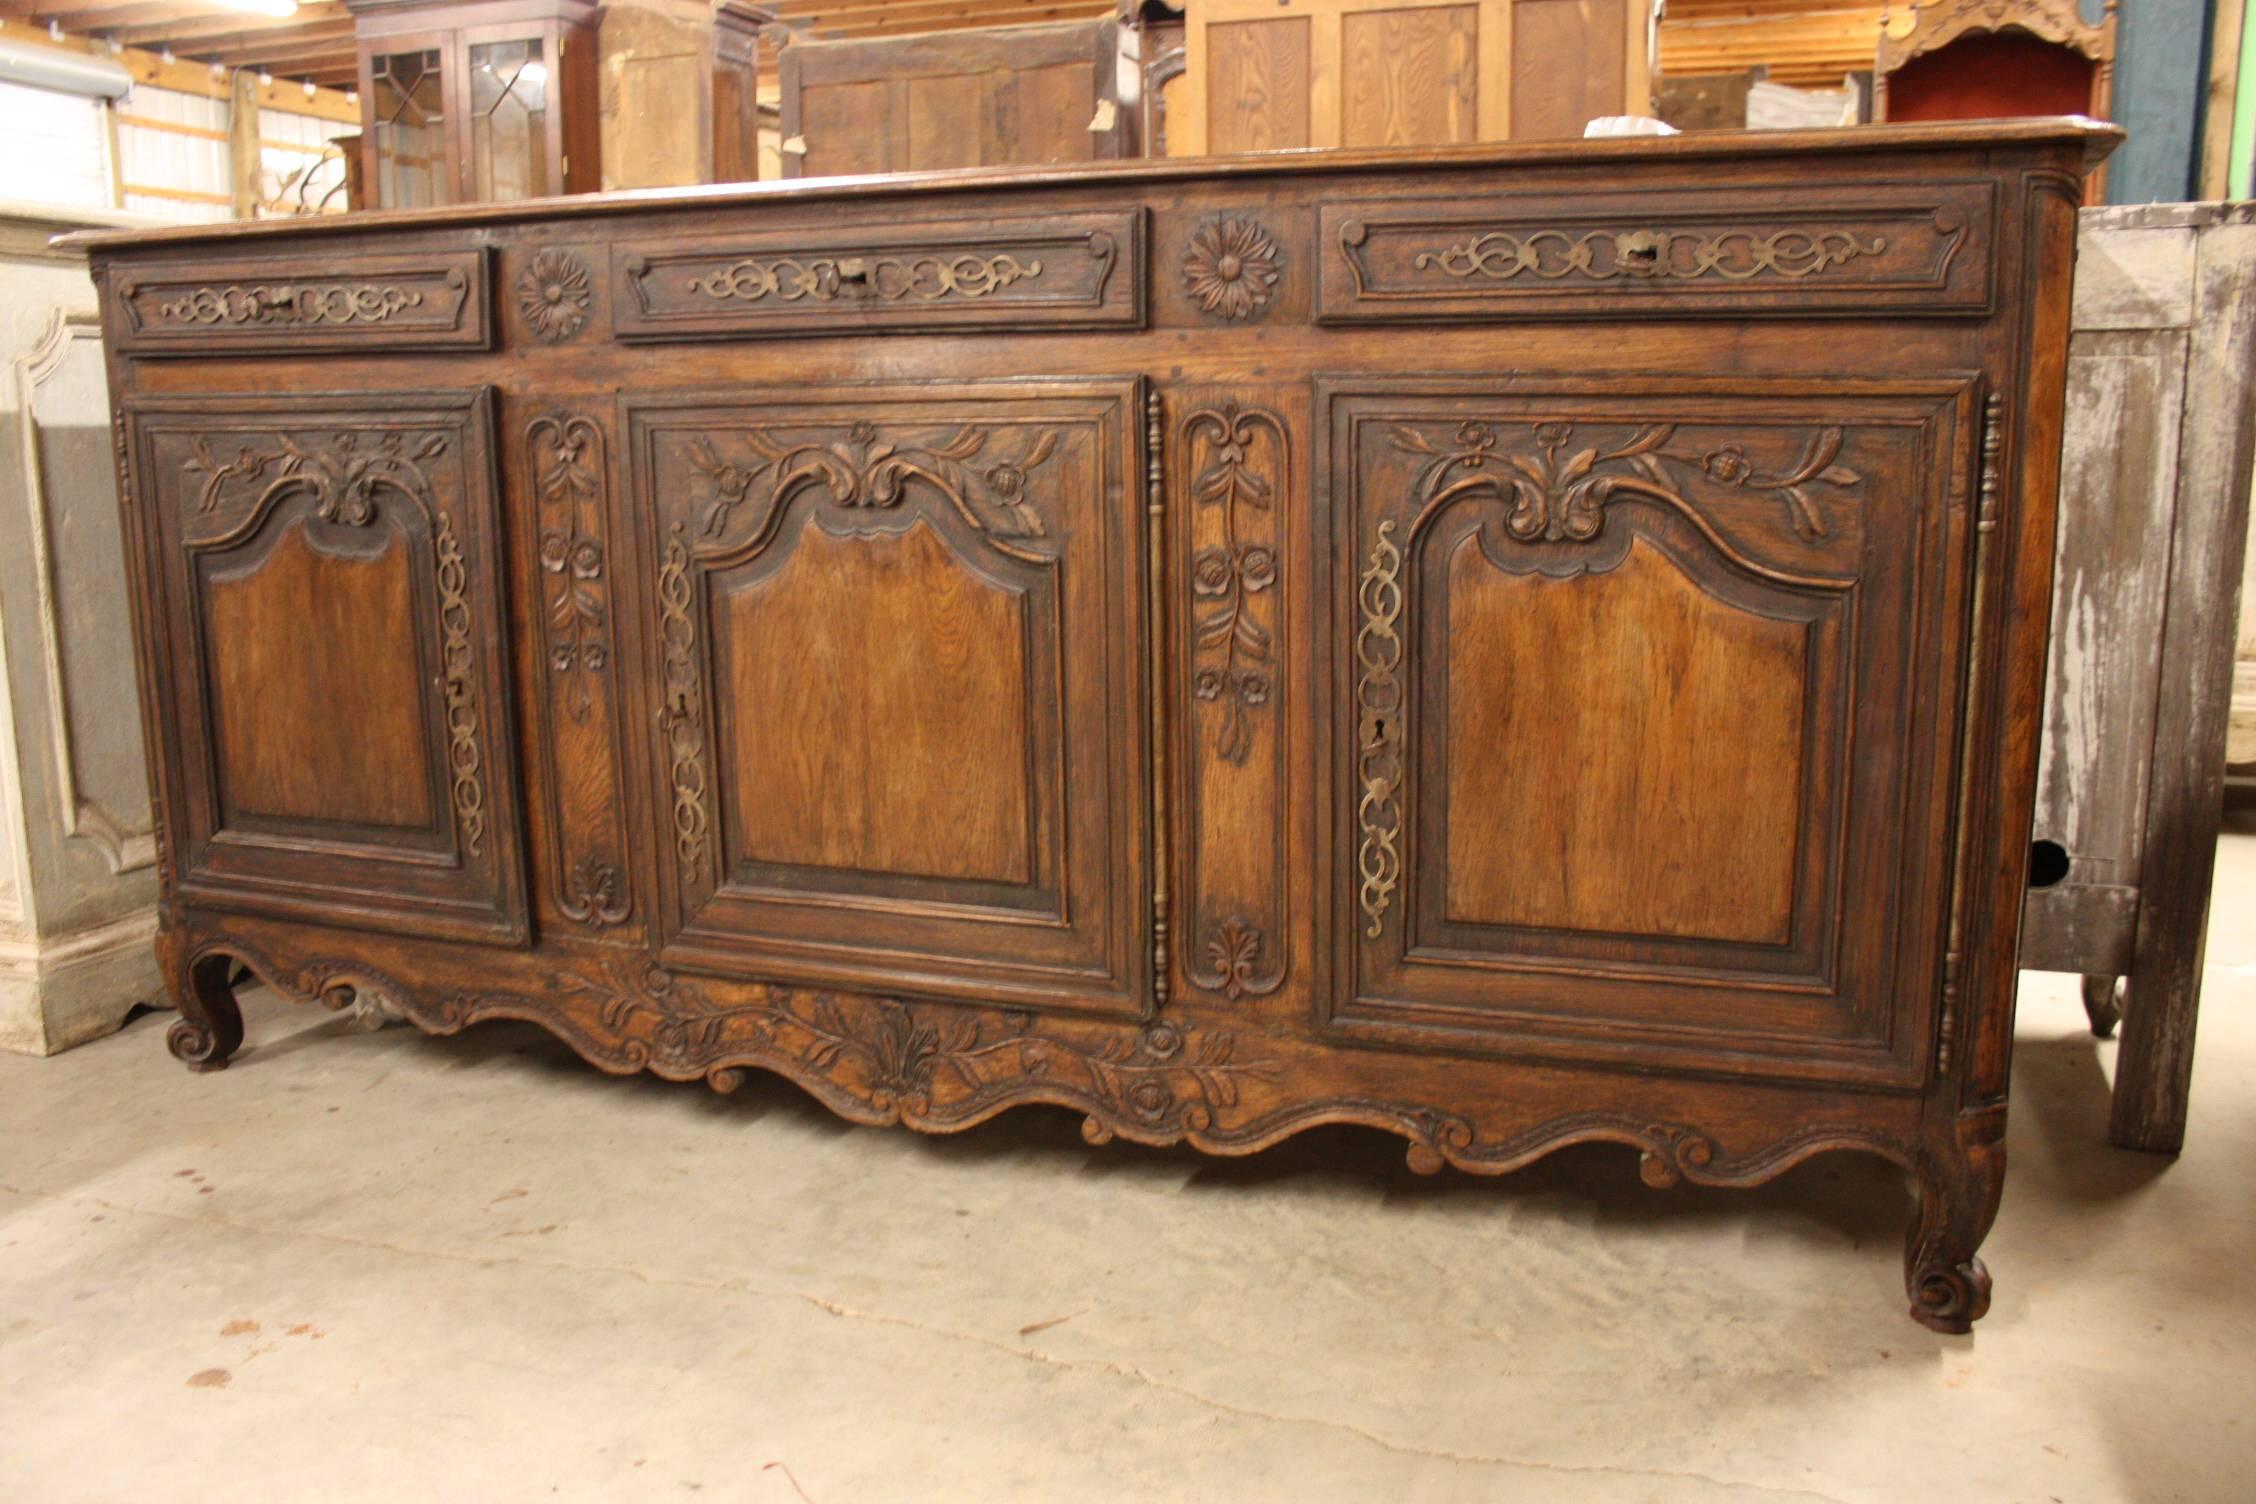 19th century buffet or sideboard in Louis XV country French style, then surrounding panels of highly figured burl and ribbon-grained fruit and nut woods to create a two-toned or two-textured effect. This example also boasts its original hand-forged